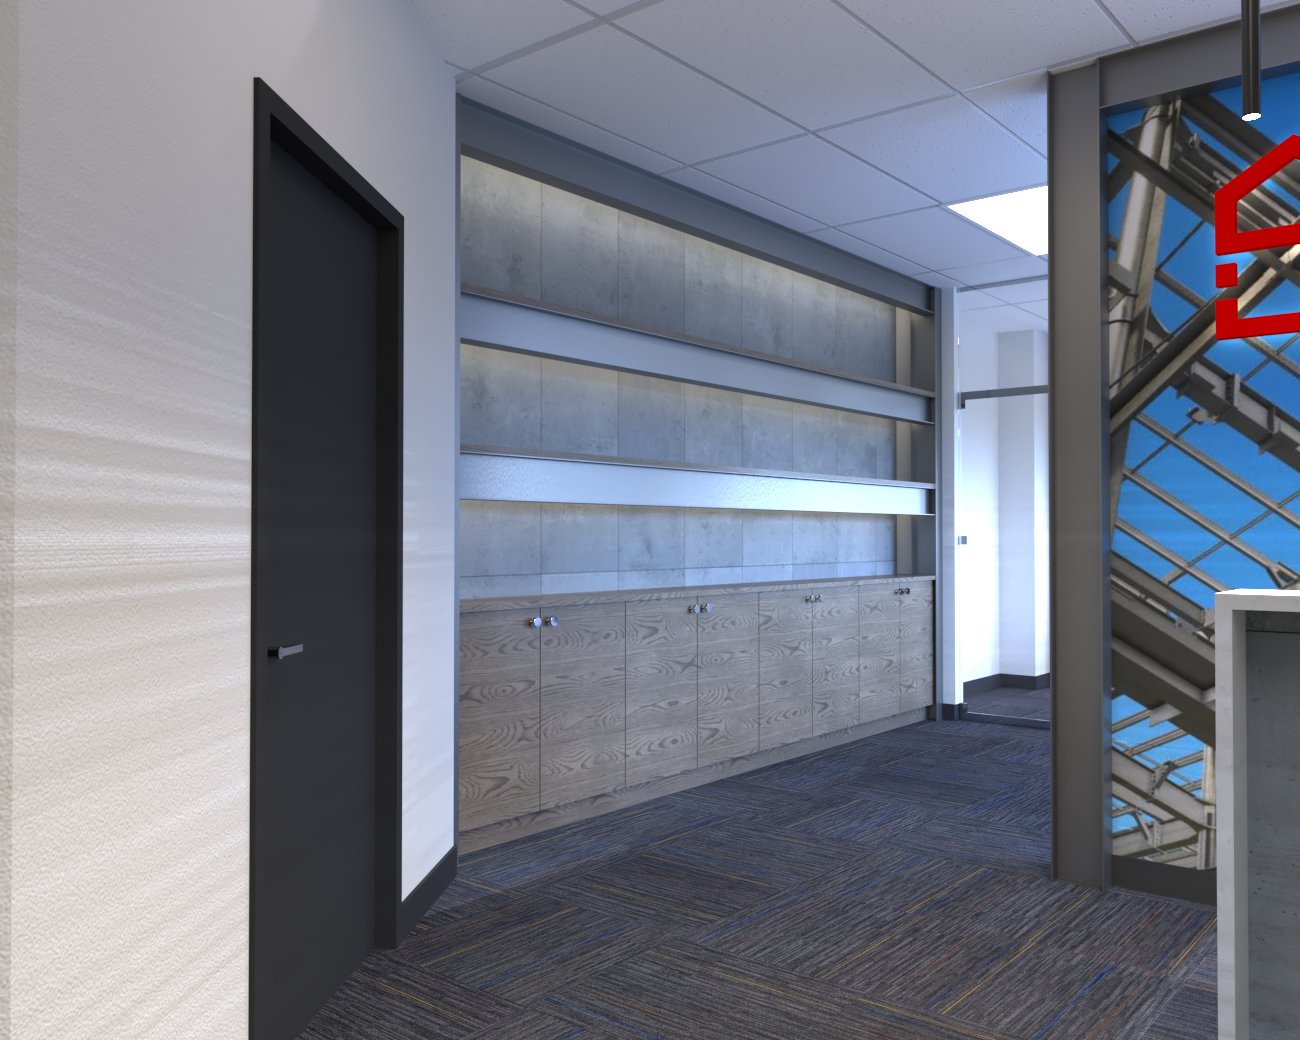 rendering of the reception area of the new office with concrete walls, exposed metal beams and new carpet tiles